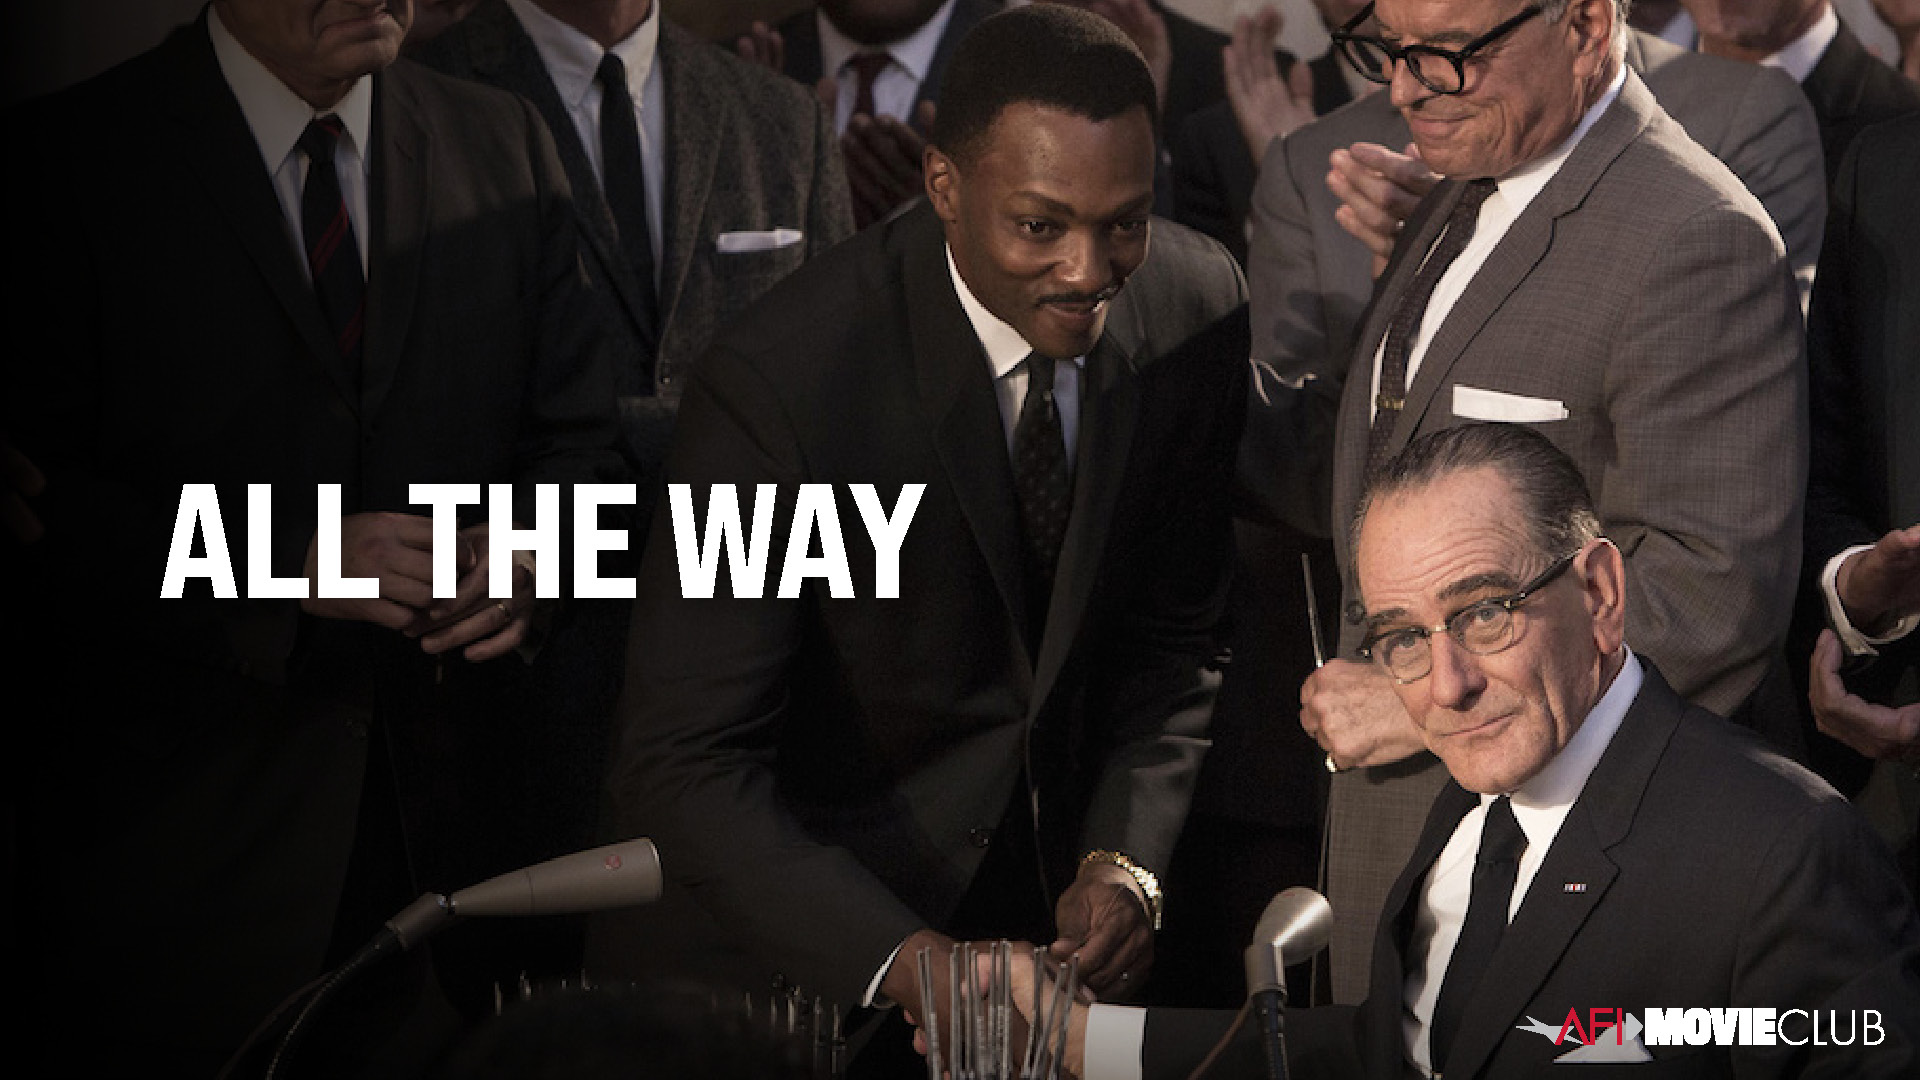 All the Way Film Still - Bryan Cranston and Anthony Mackie